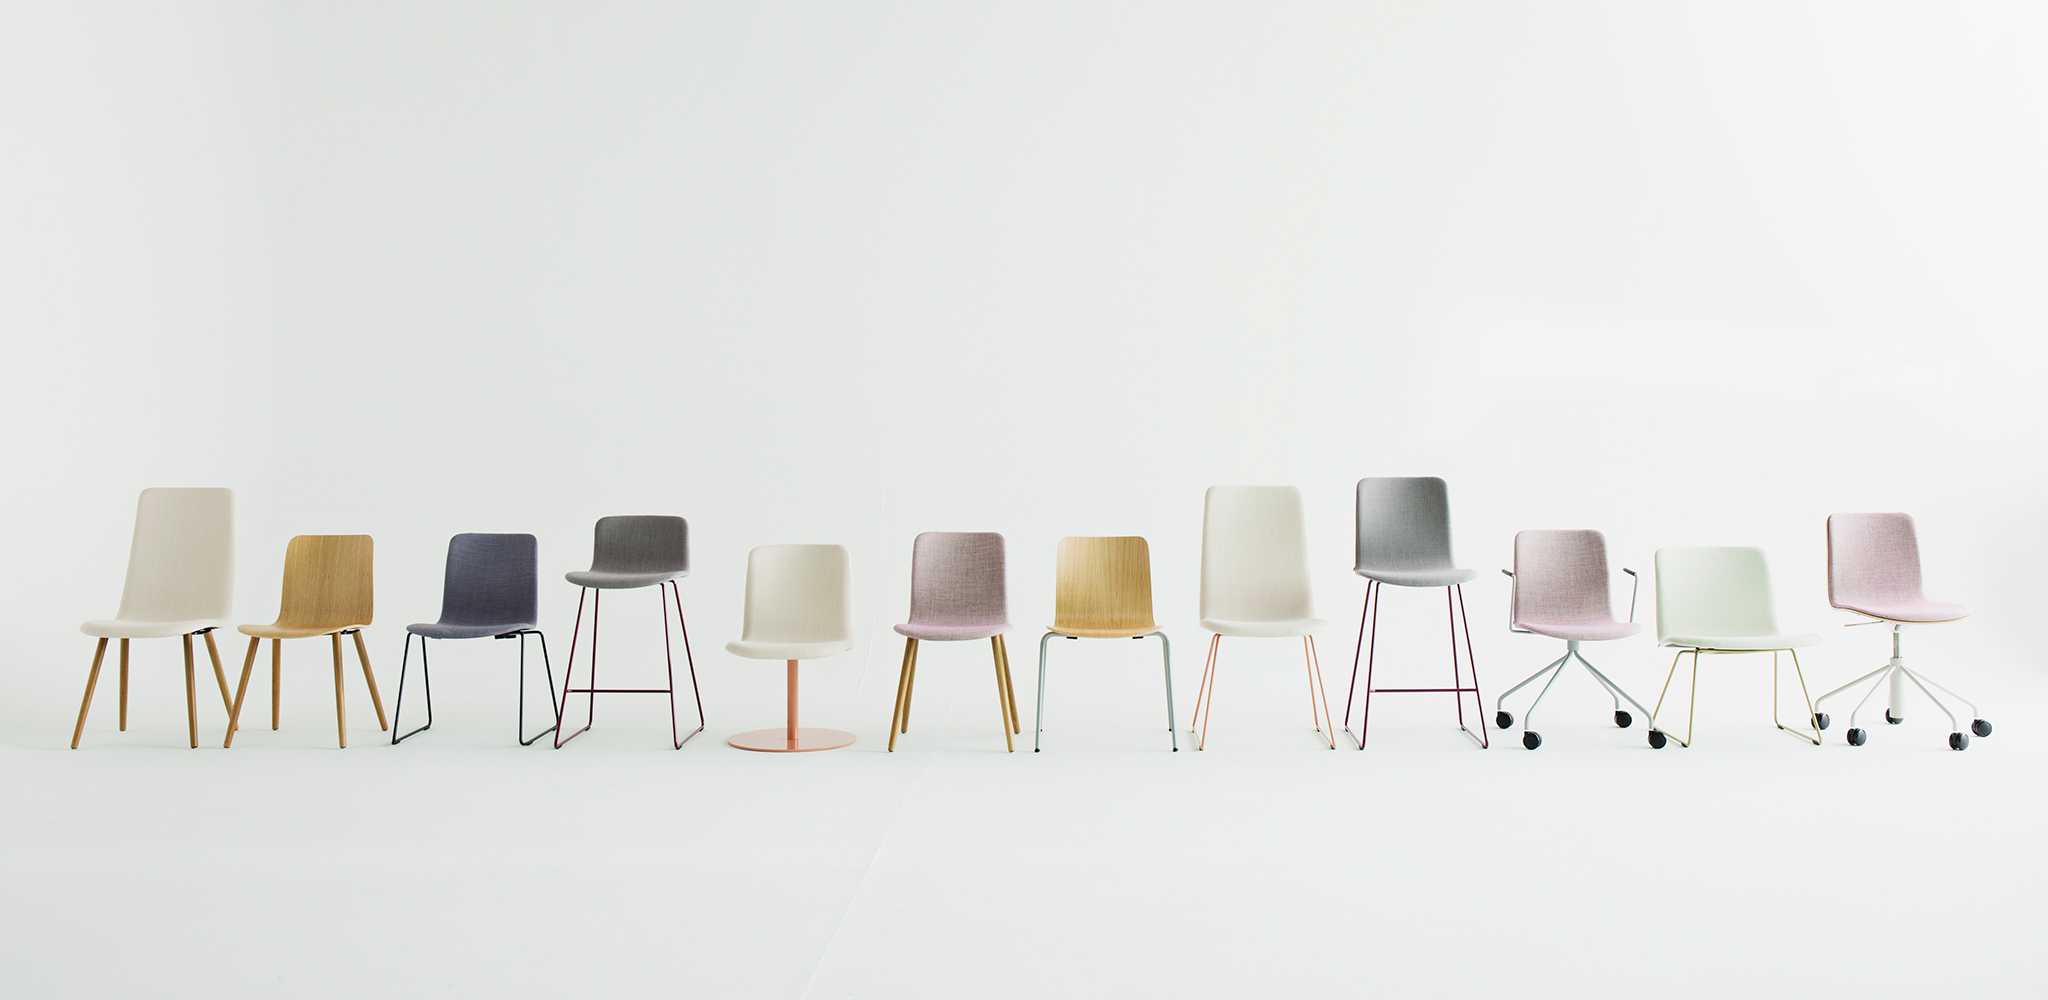 Sola chairs in a row